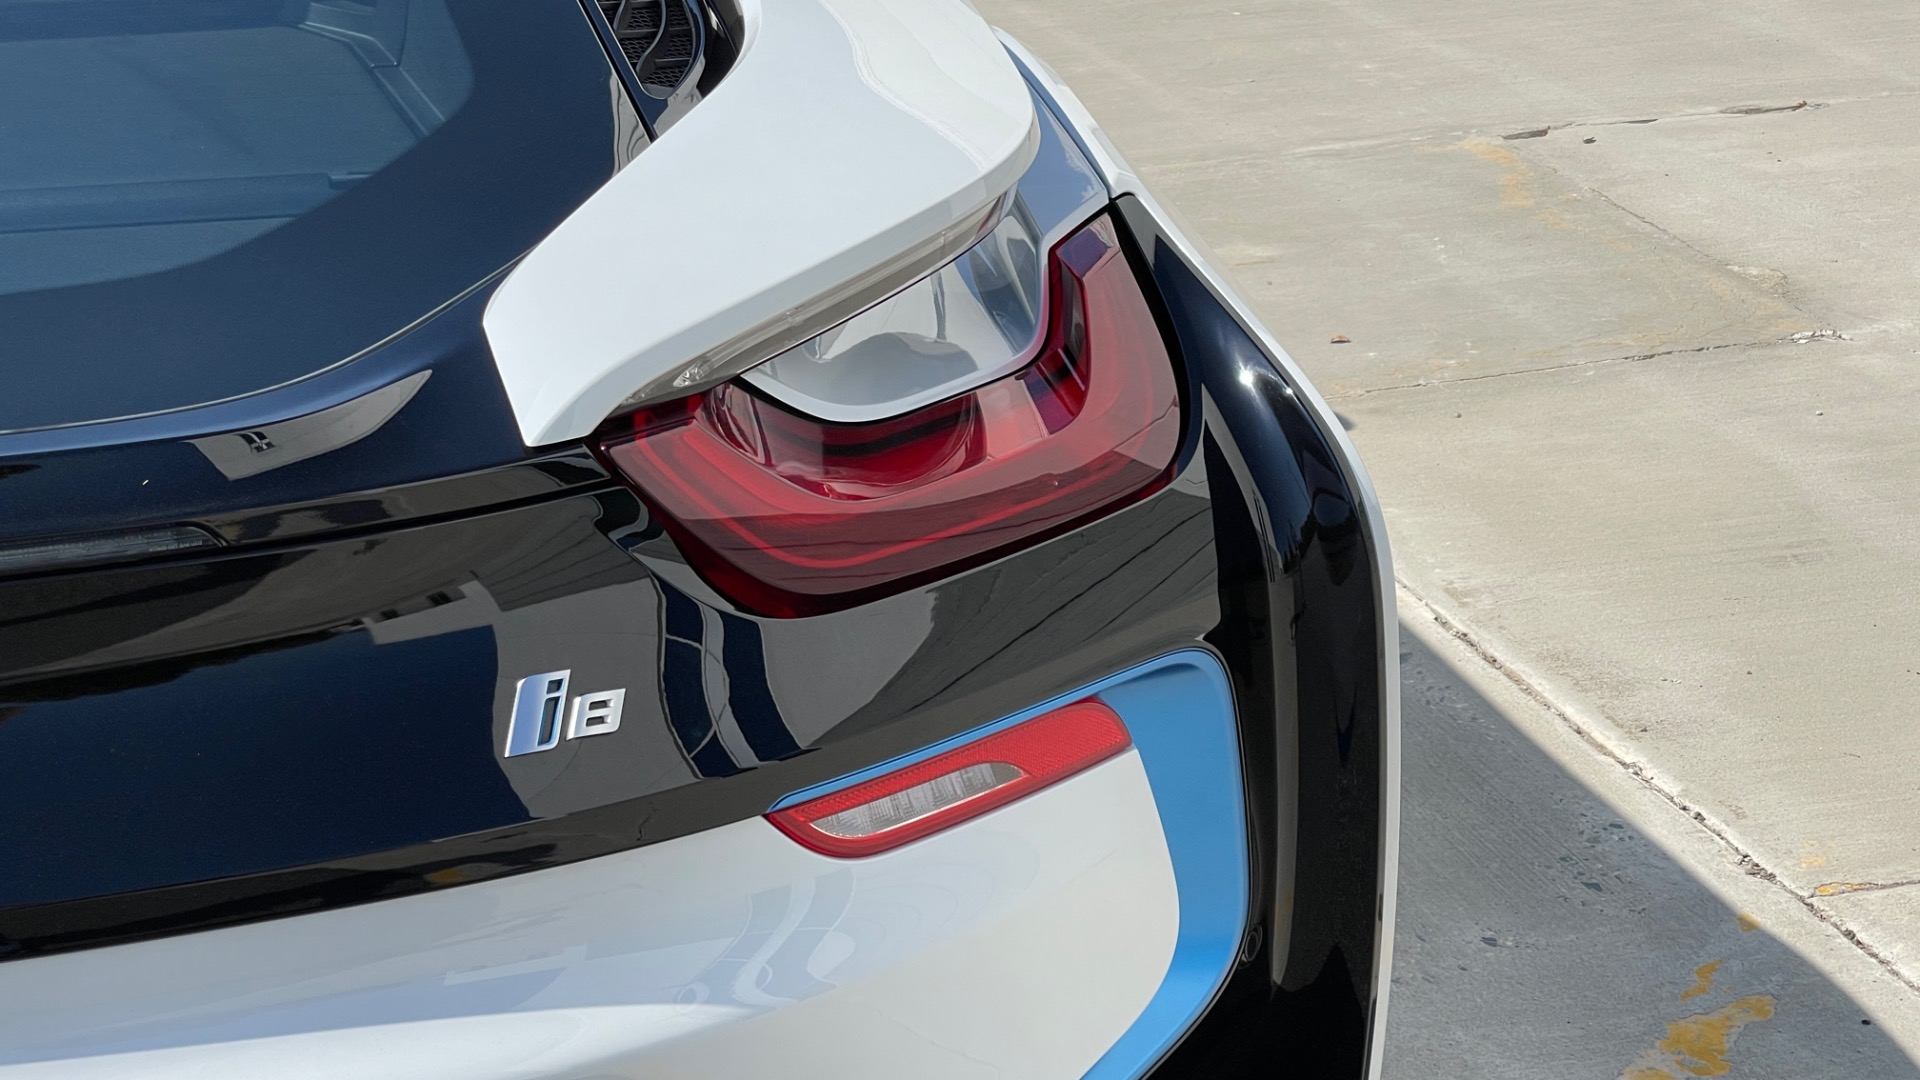 Used 2014 BMW i8 PURE IMPULSE WORLD / BLUE SEATBELTS / PERFORATED LEATHER / LED HEADLIGHTS for sale $75,999 at Formula Imports in Charlotte NC 28227 35